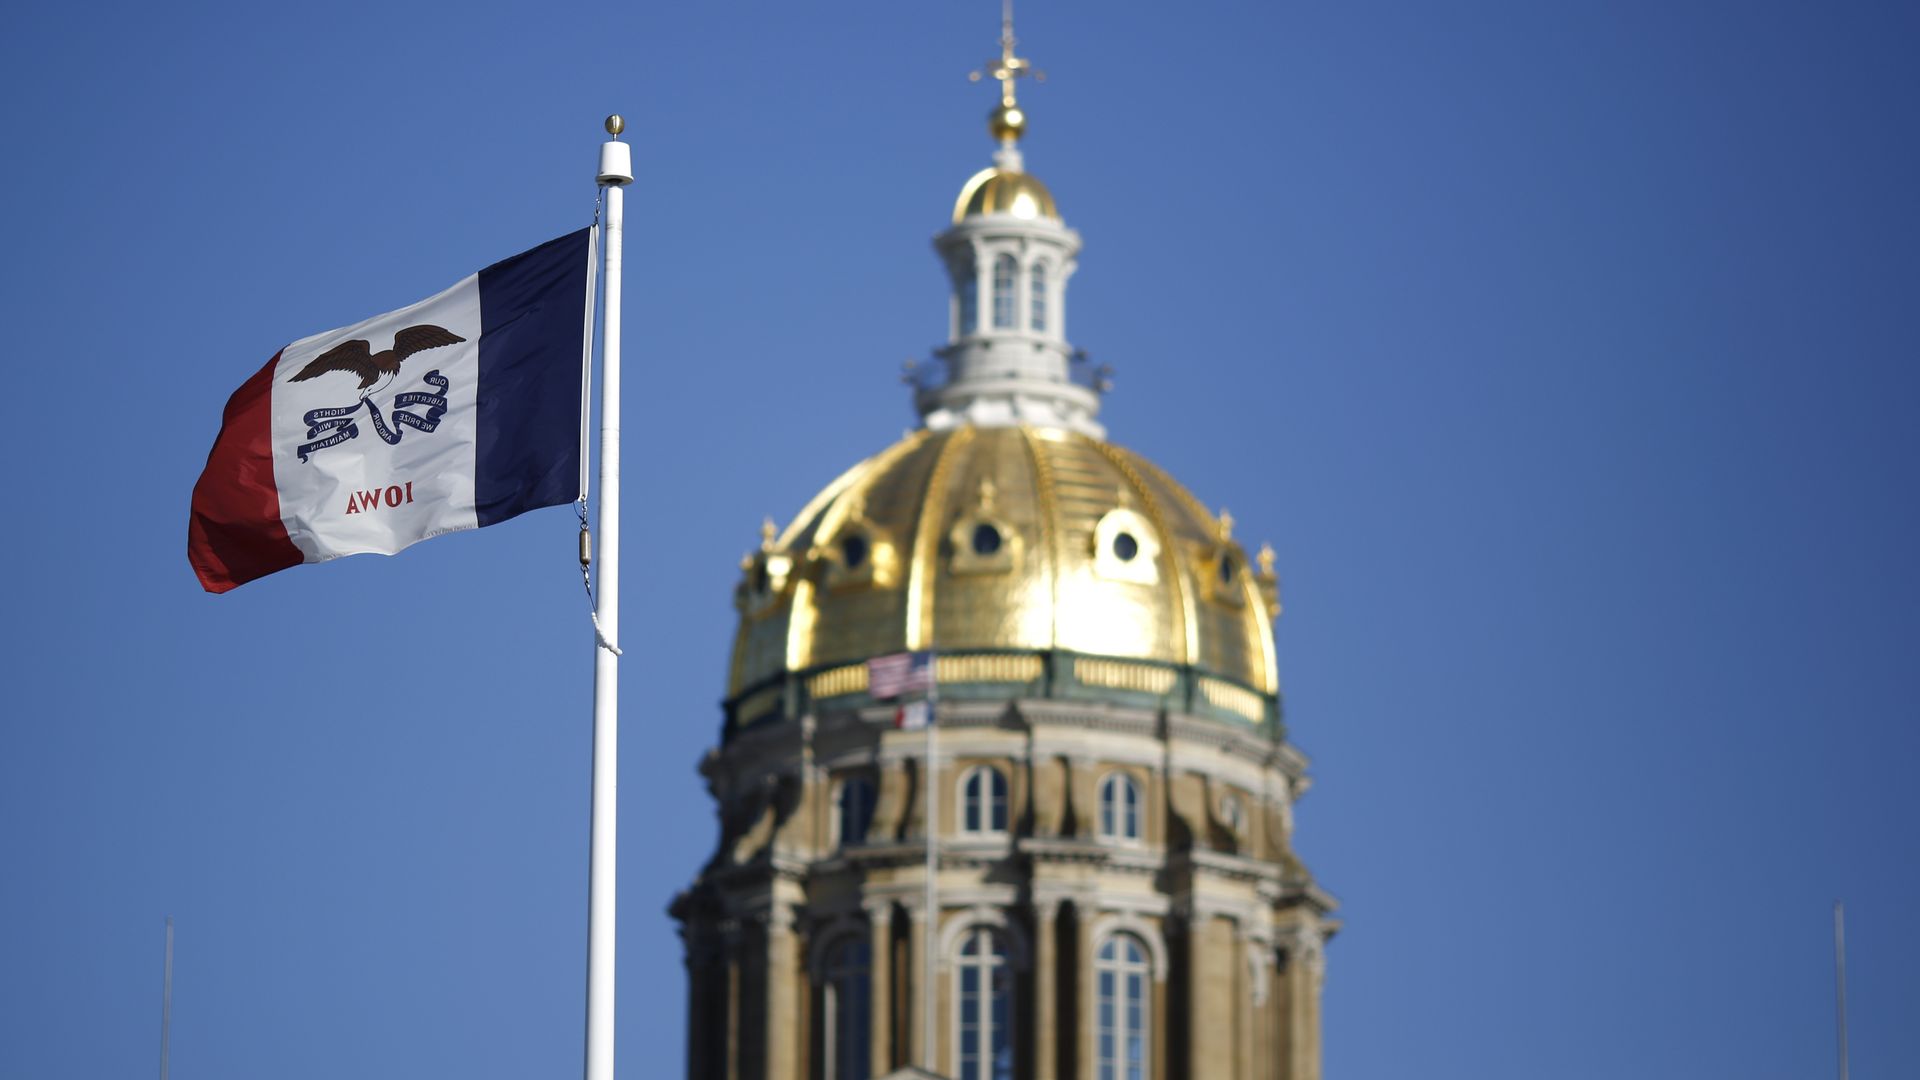 The Iowa state flag flies outside the State Capitol Building in Des Moines, Iowa